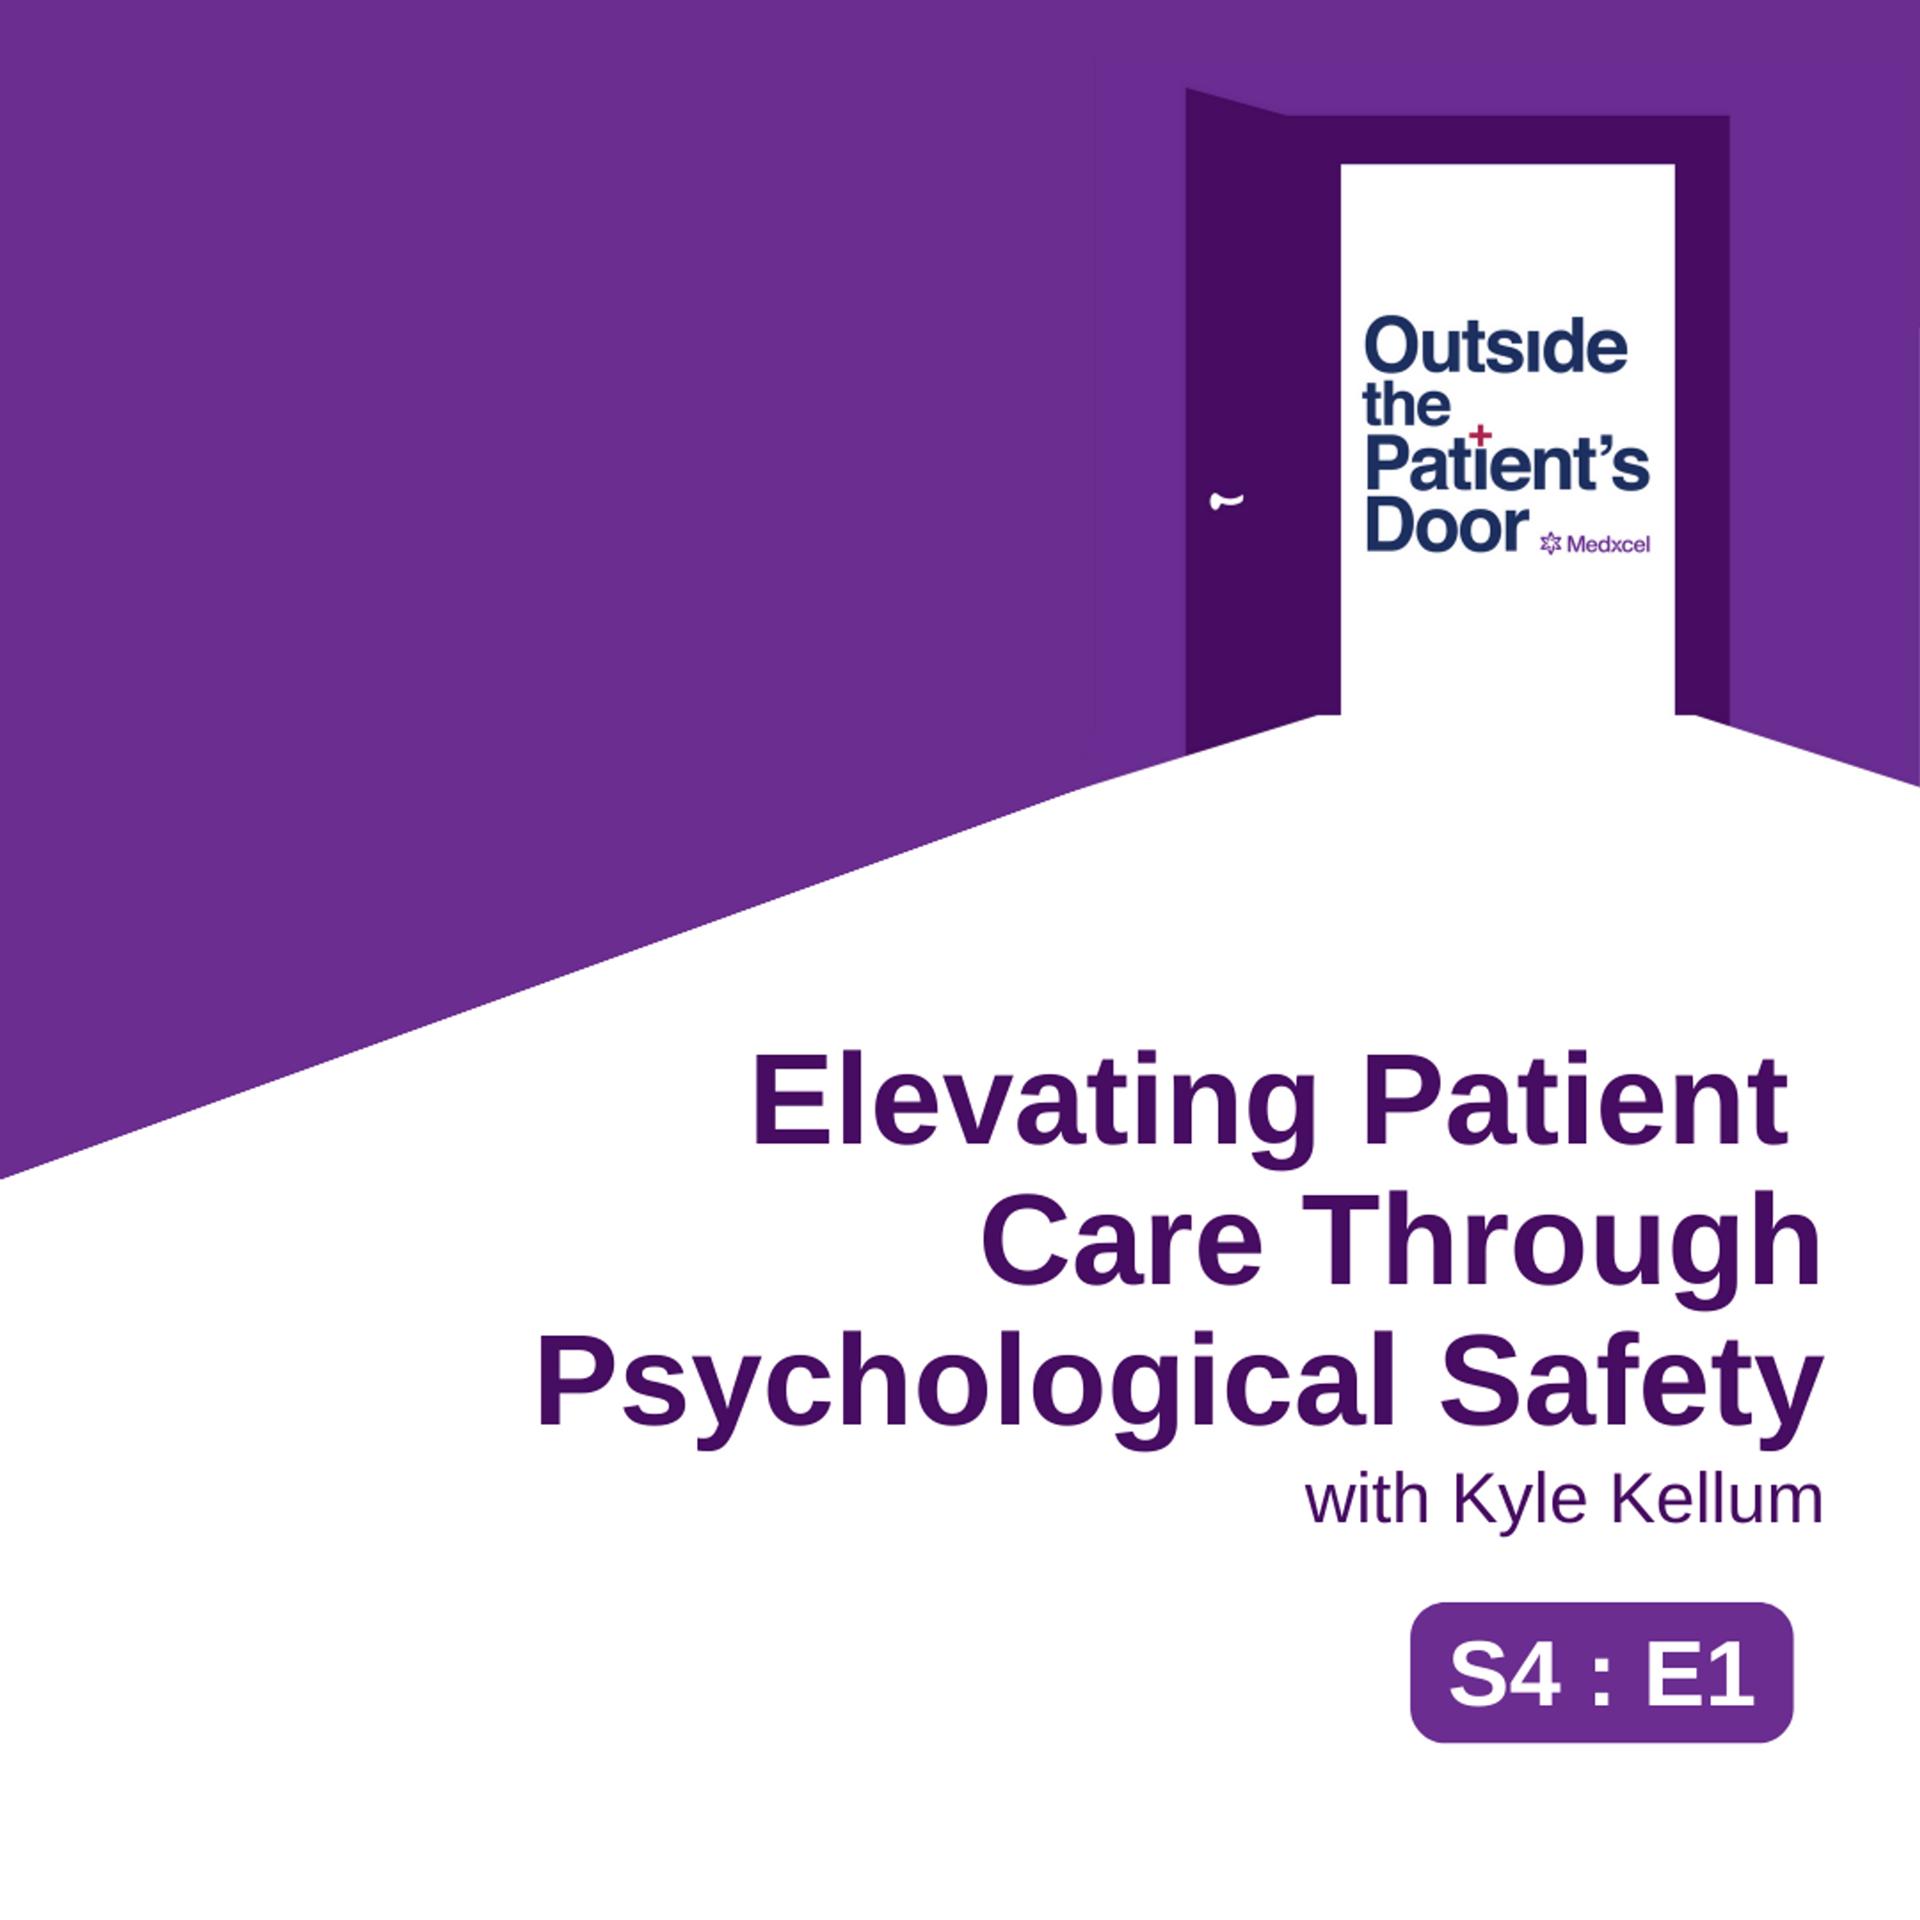 S4 E1: Elevating Patient Care Through Psychological Safety with Kyle Kellum